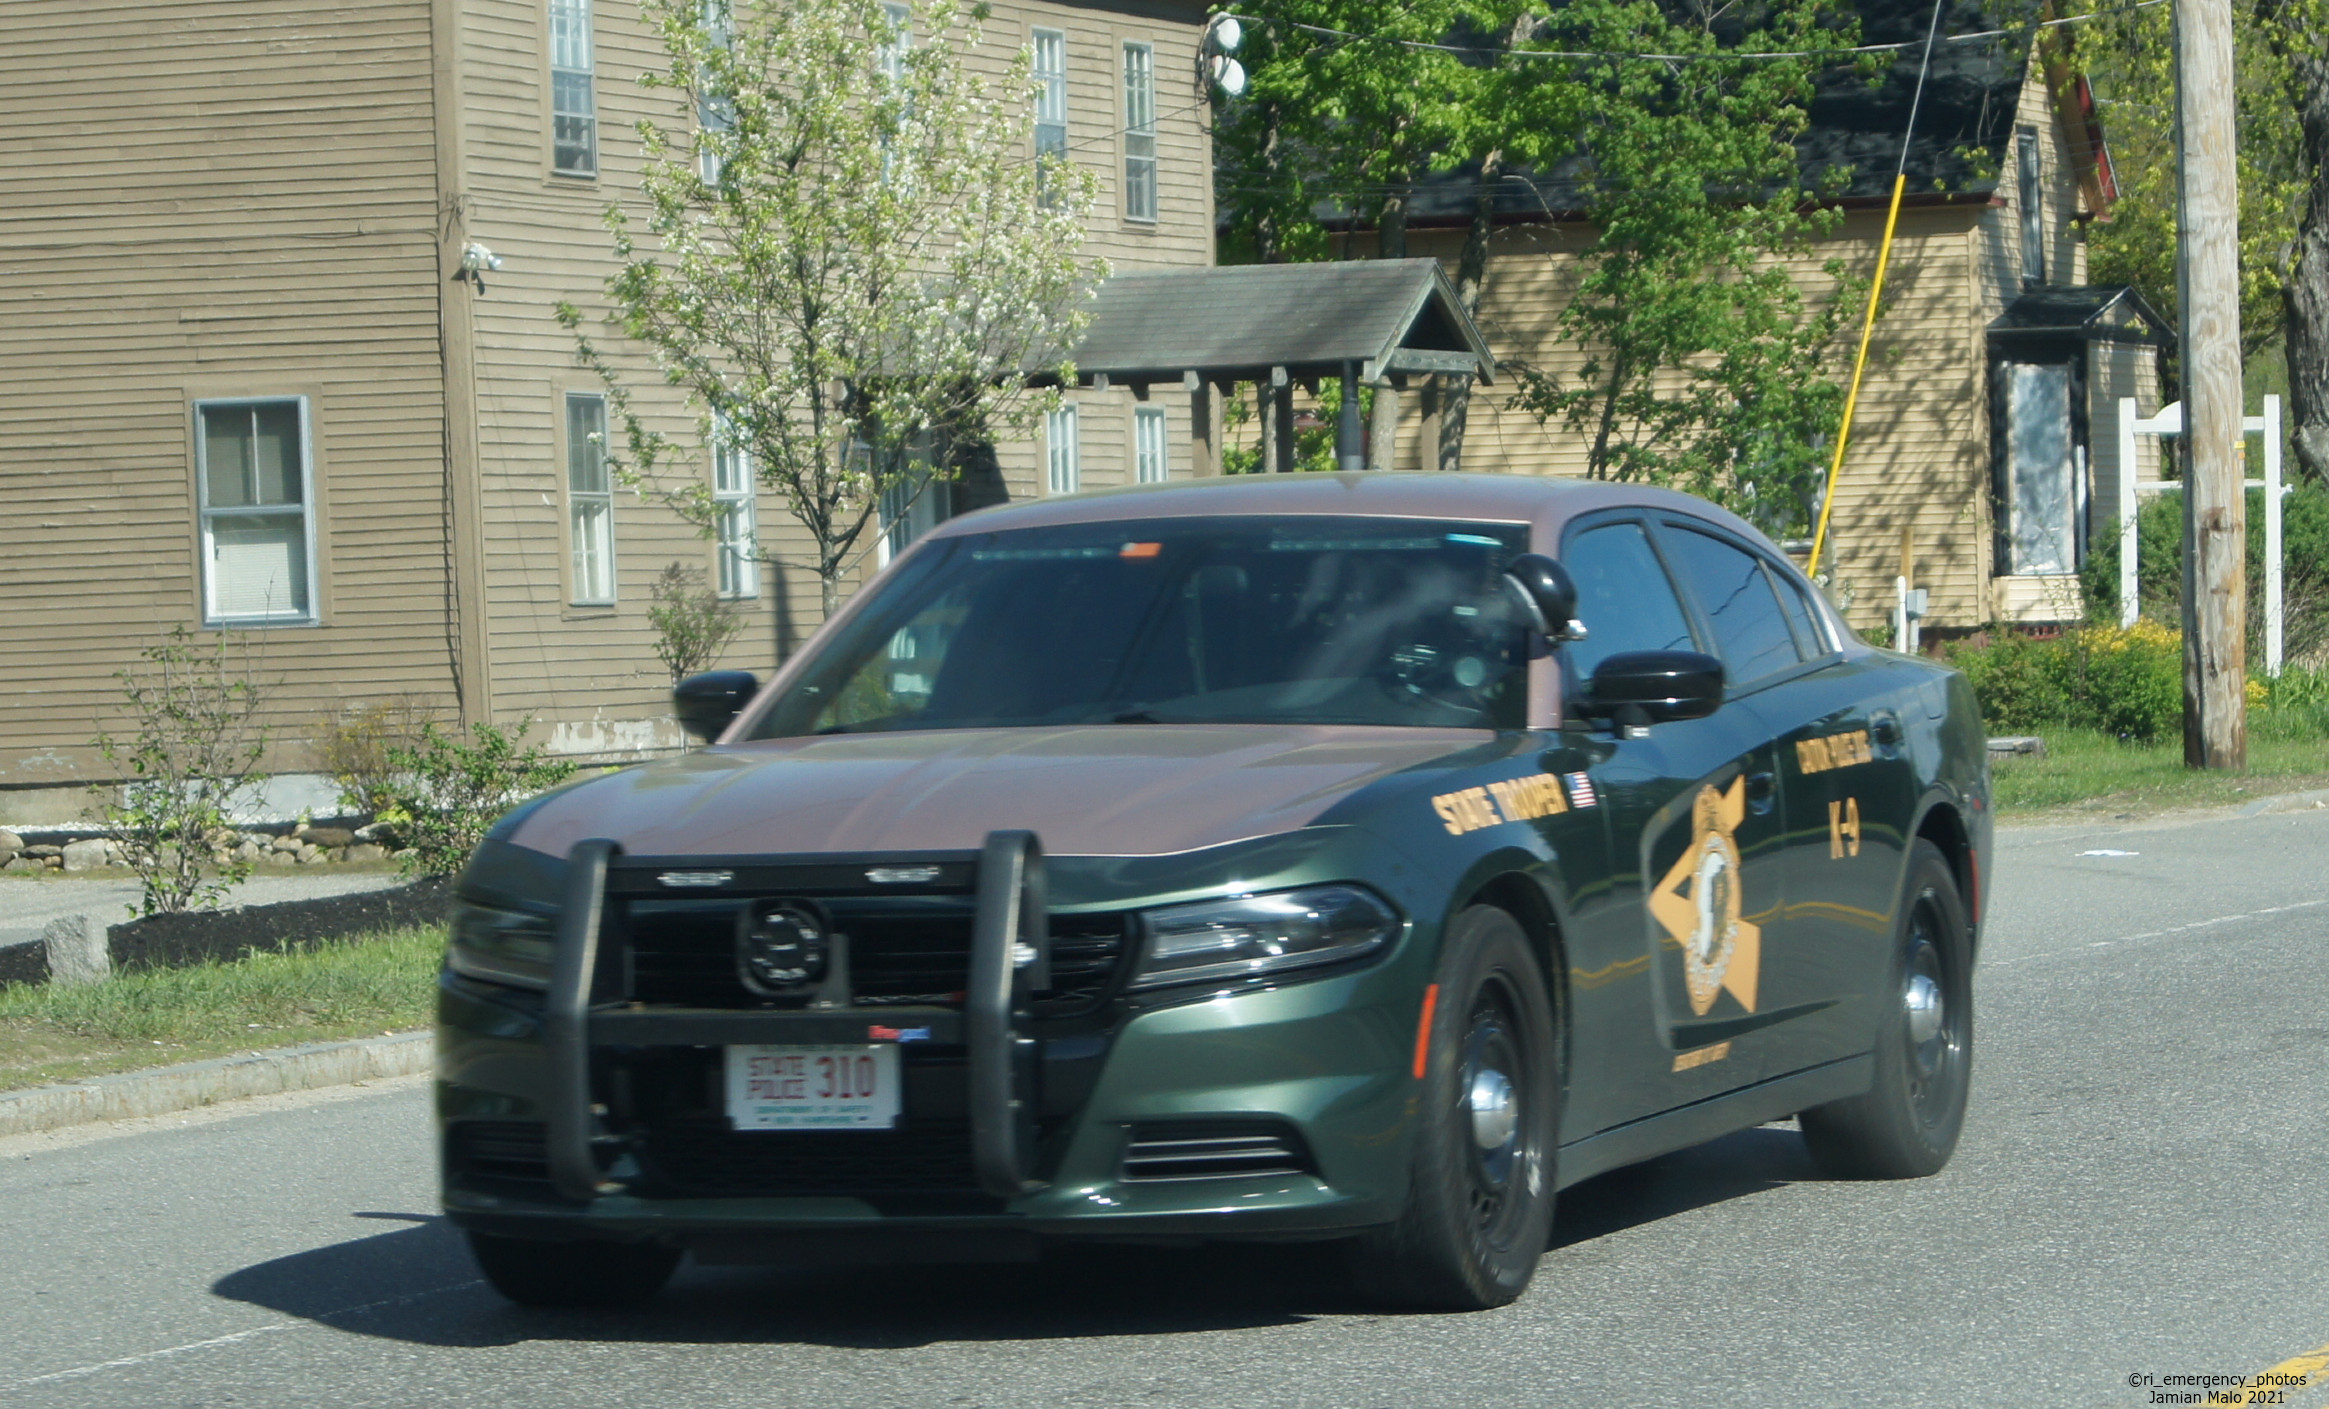 A photo  of New Hampshire State Police
            Cruiser 310, a 2017-2019 Dodge Charger             taken by Jamian Malo